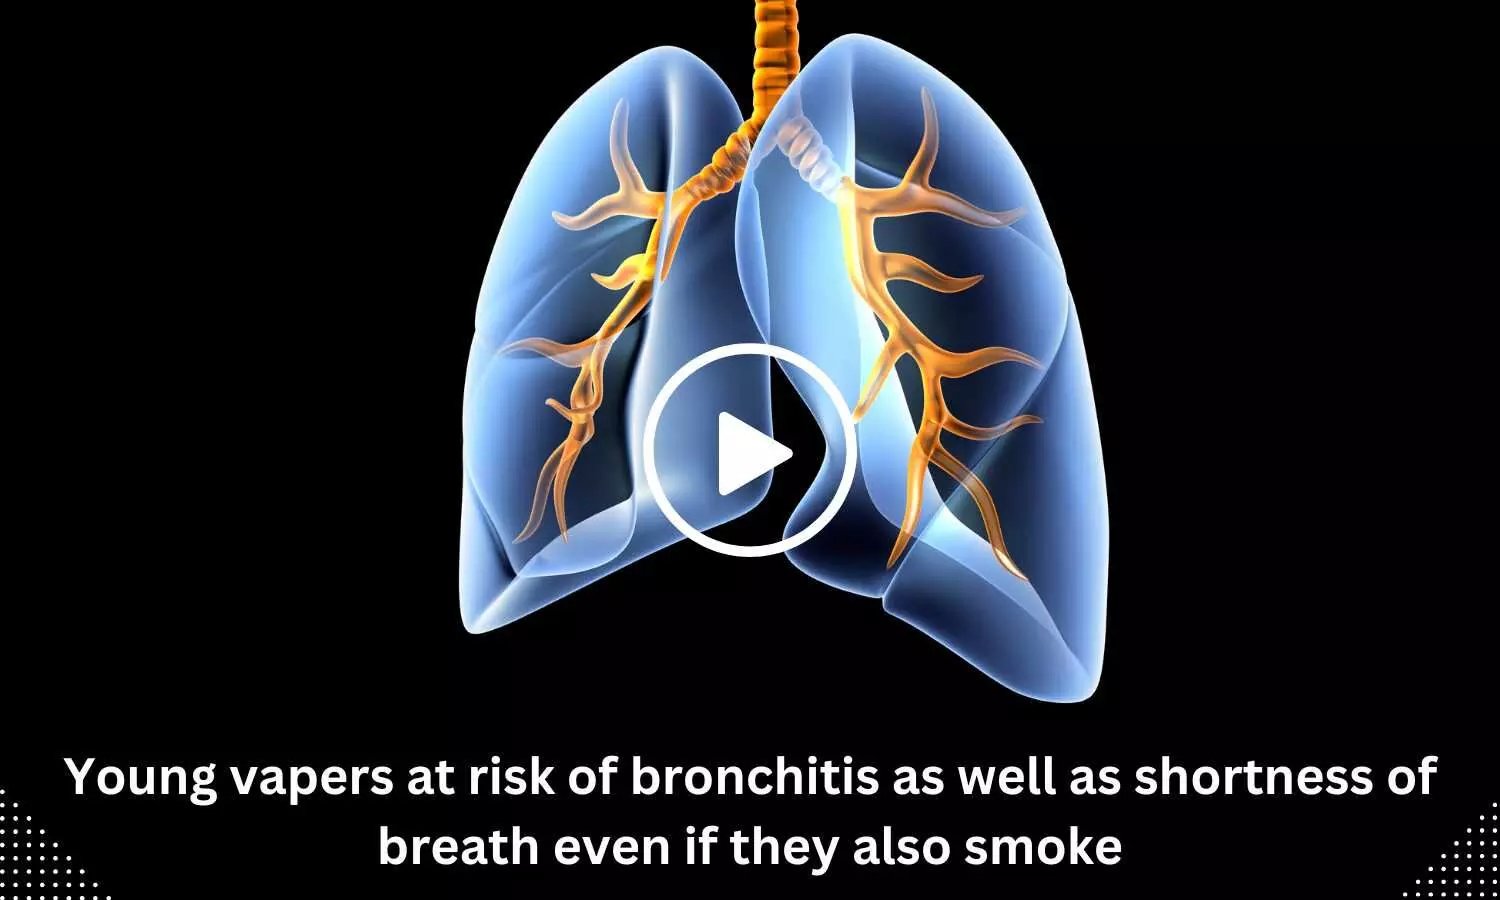 Young vapers at risk of bronchitis as well as shortness of breath even if they also smoke